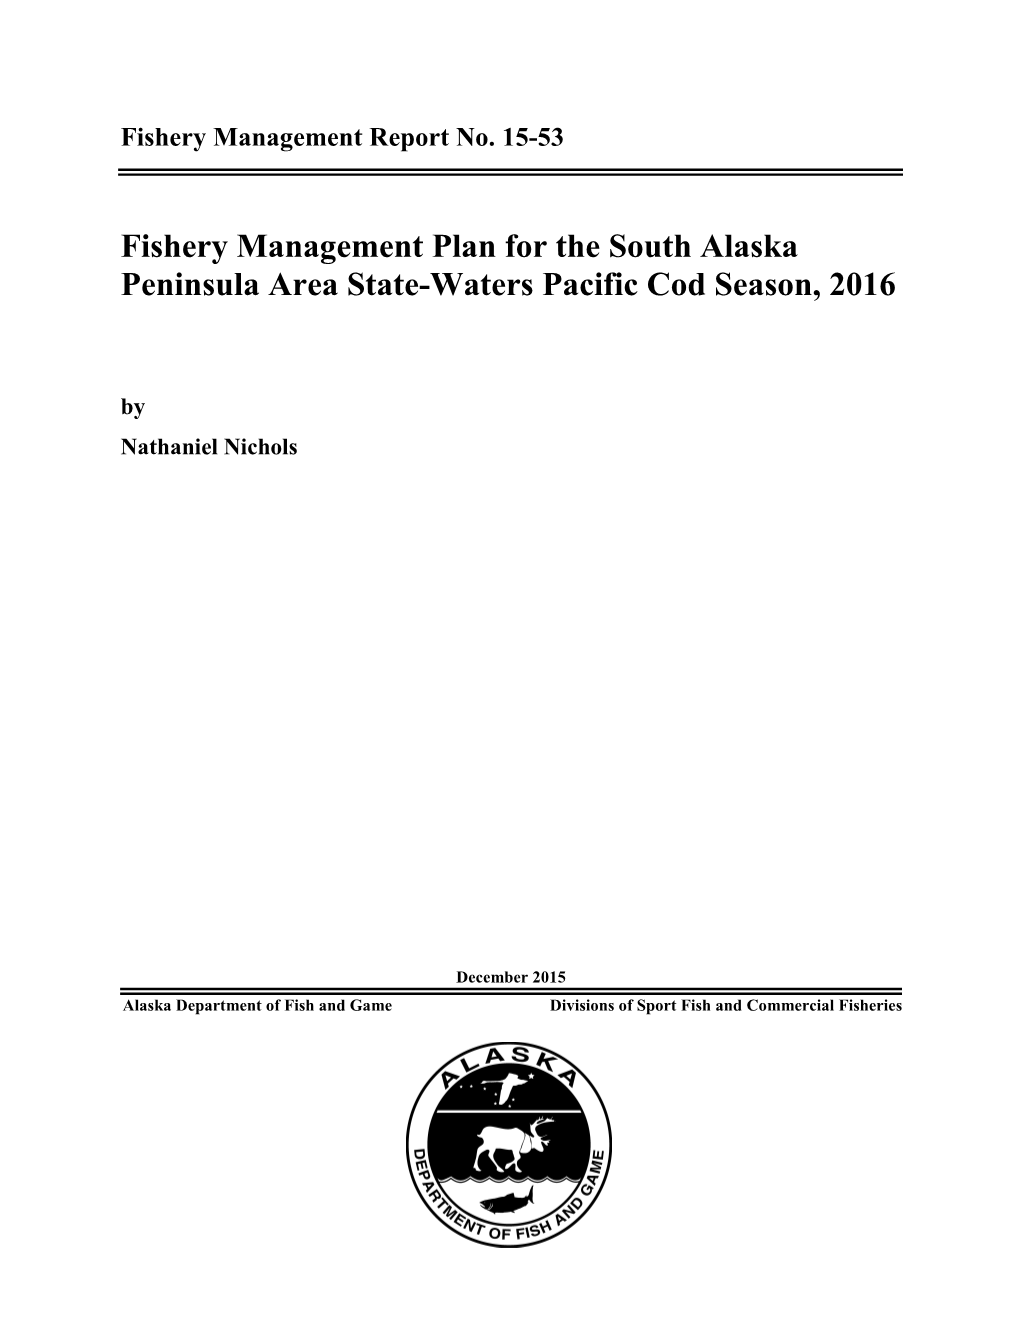 Fishery Management Plan for the South Alaska Peninsula Area State-Waters Pacific Cod Season, 2016